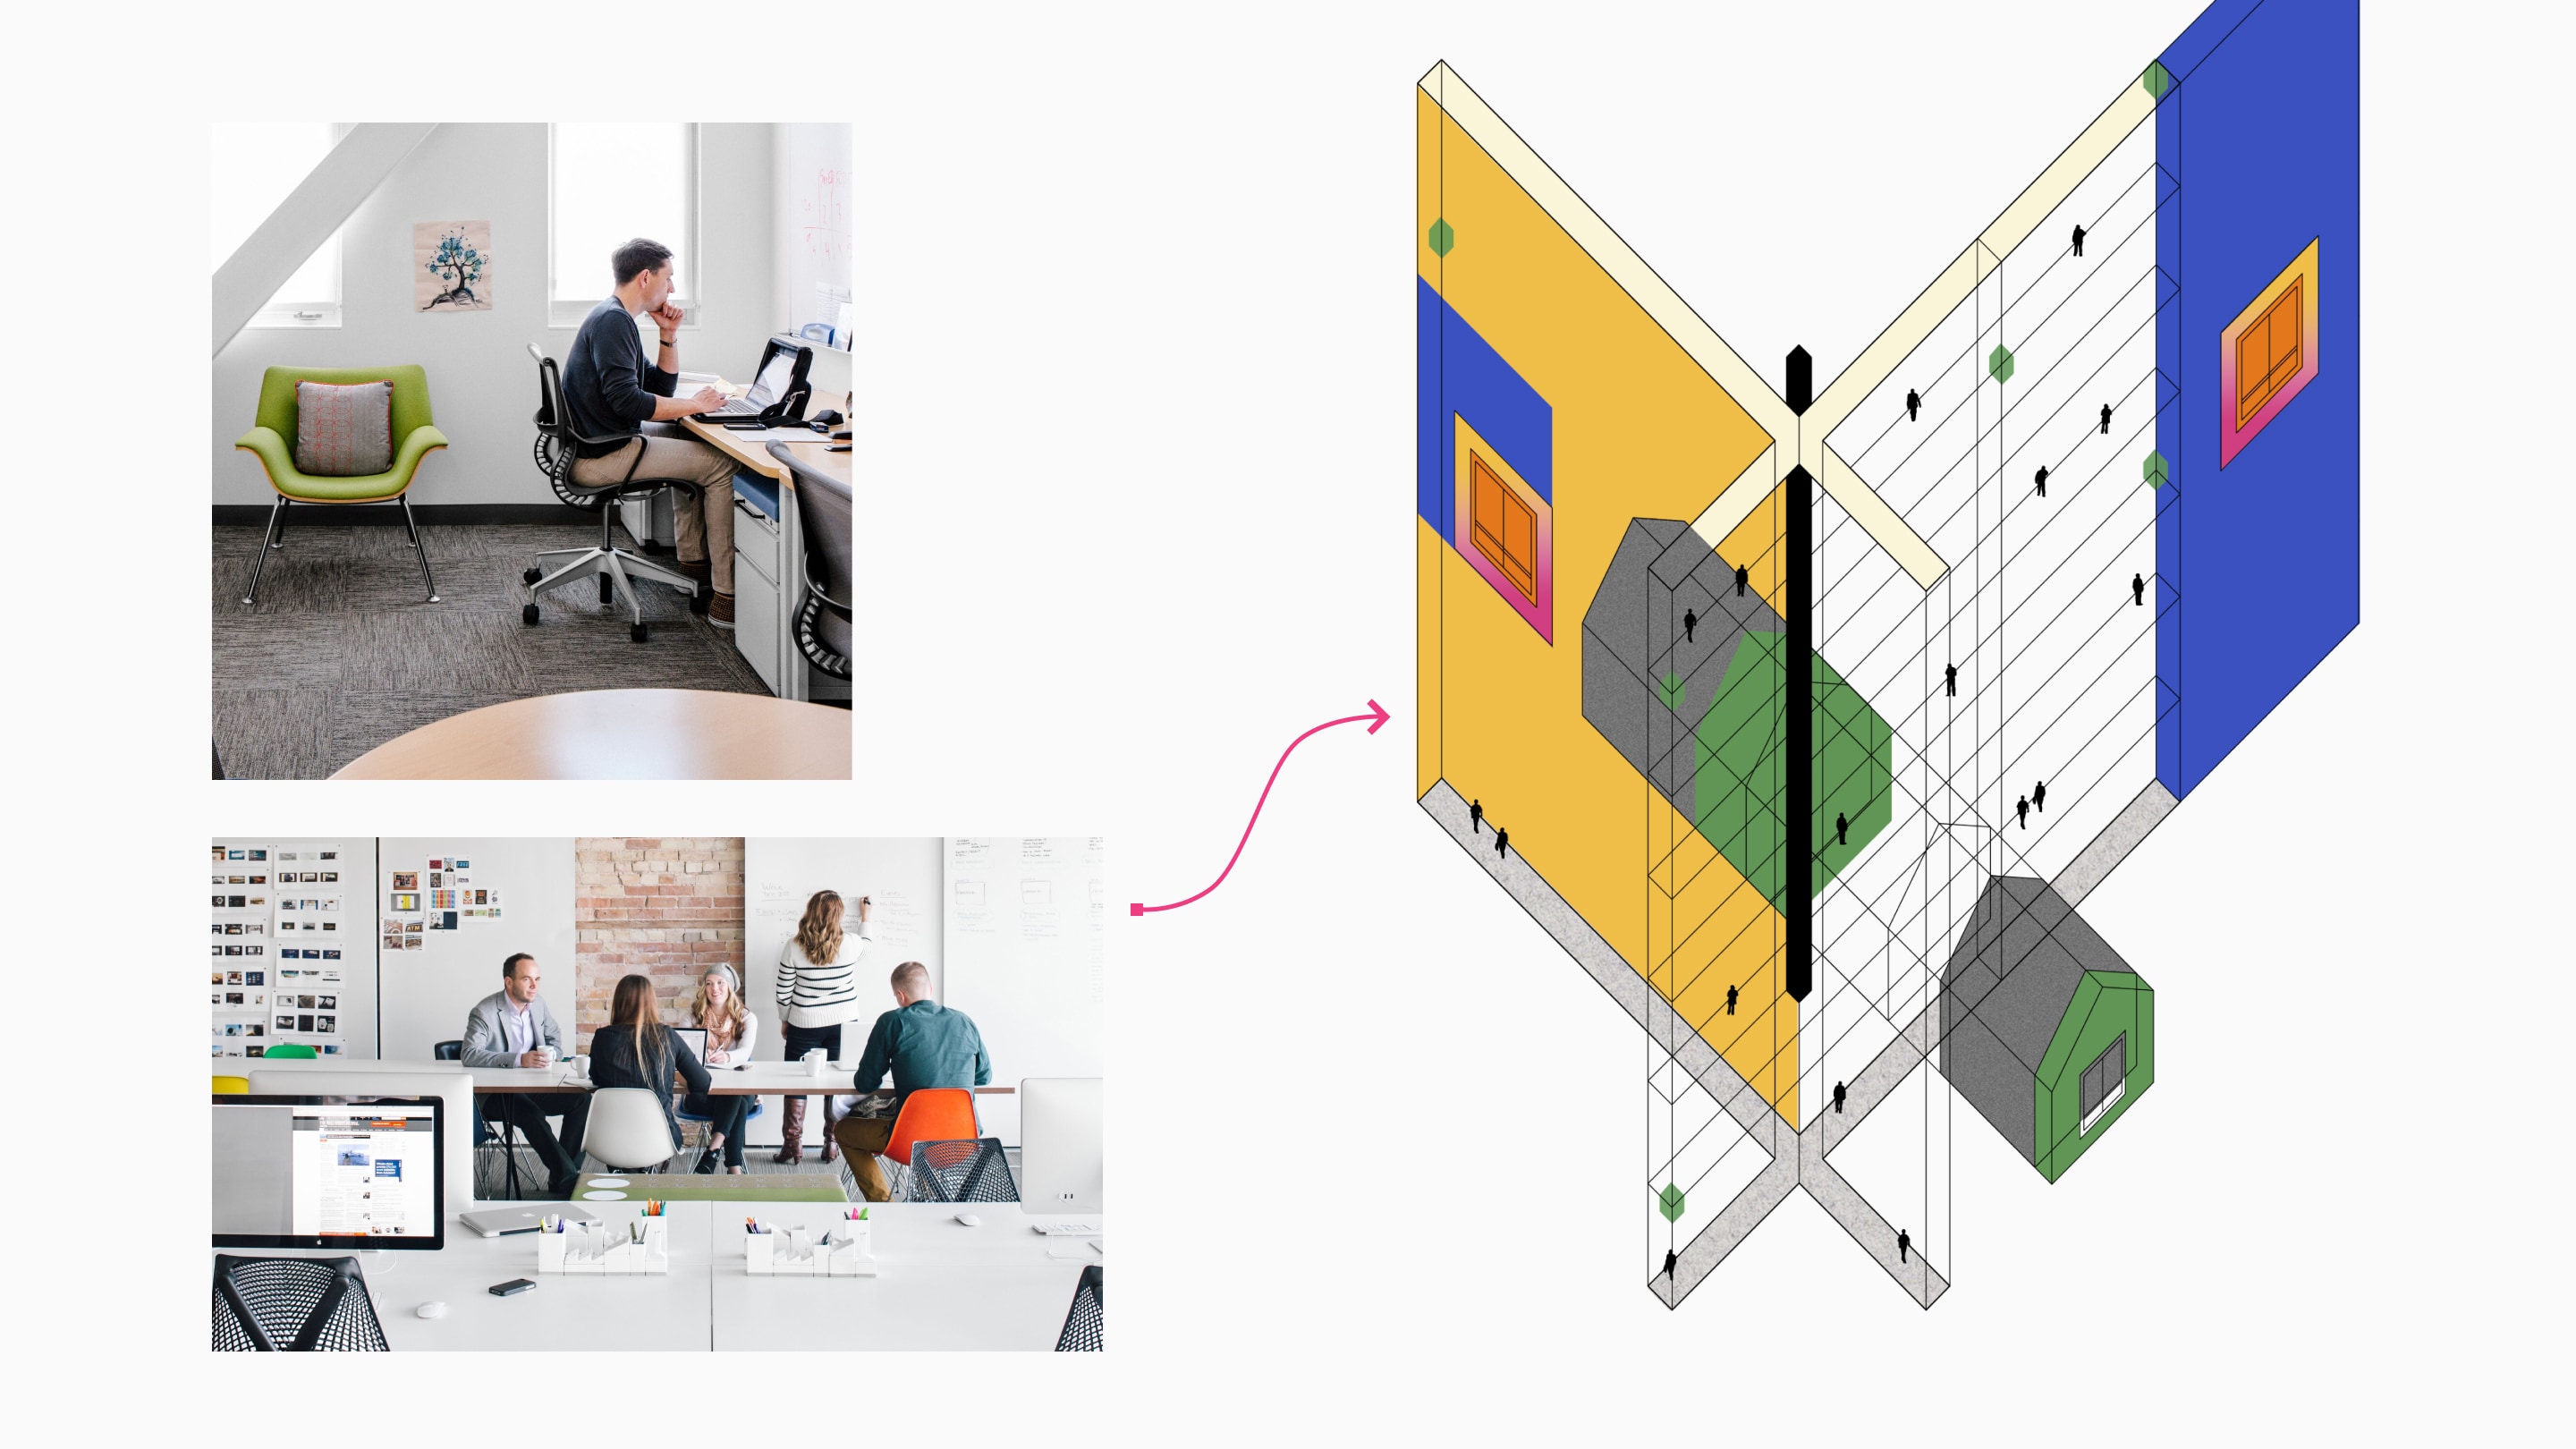 Collage image comprised of 3 images on a white background. The top, left image is of a man sitting in a graphite Setu chair at a workstation with a green Plex chair in the background. The bottom, left image shows people meeting at a seated-height, rectangular conference table with a woman standing, drawing on a whiteboard. The image on the right is a futuristic, bright-colored illustration representing work space.